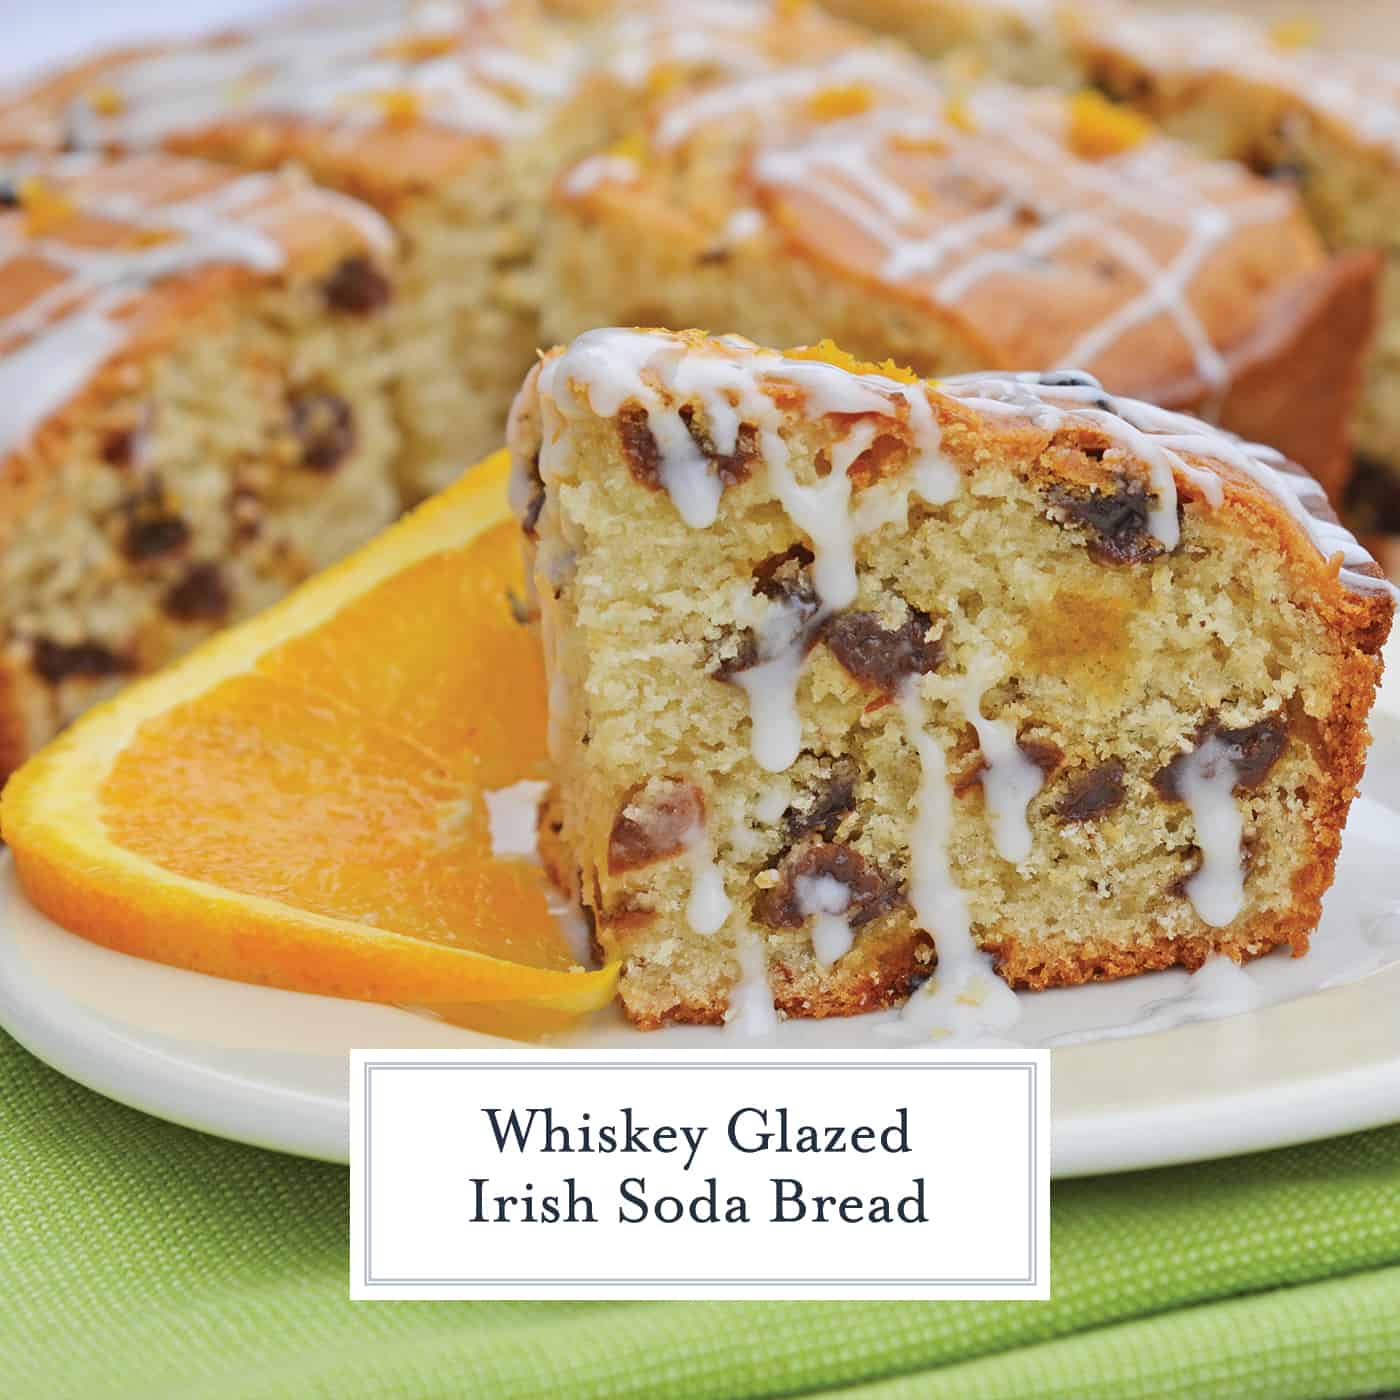 This Irish Soda Bread with Whiskey Glaze recipe is Irish food at its best! It consists of whiskey, caraway seeds, currants, and fresh orange juice and zest! #irishsodabreadrecipe #irishsodabreadhistory www.savoryexperiments.com 